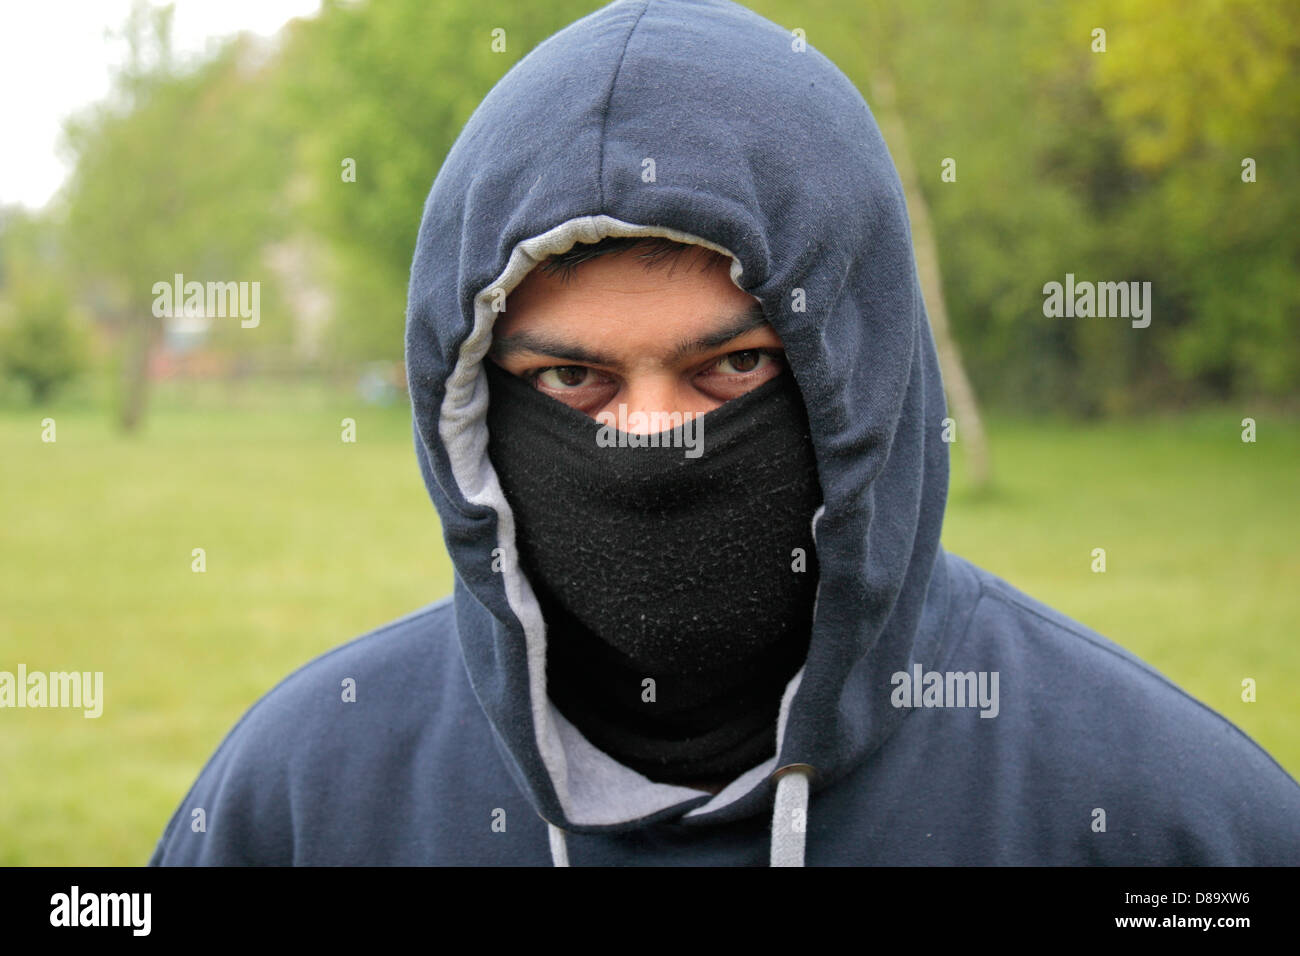 A British Asian man wearing a hoddie with his face covered. Stock Photo